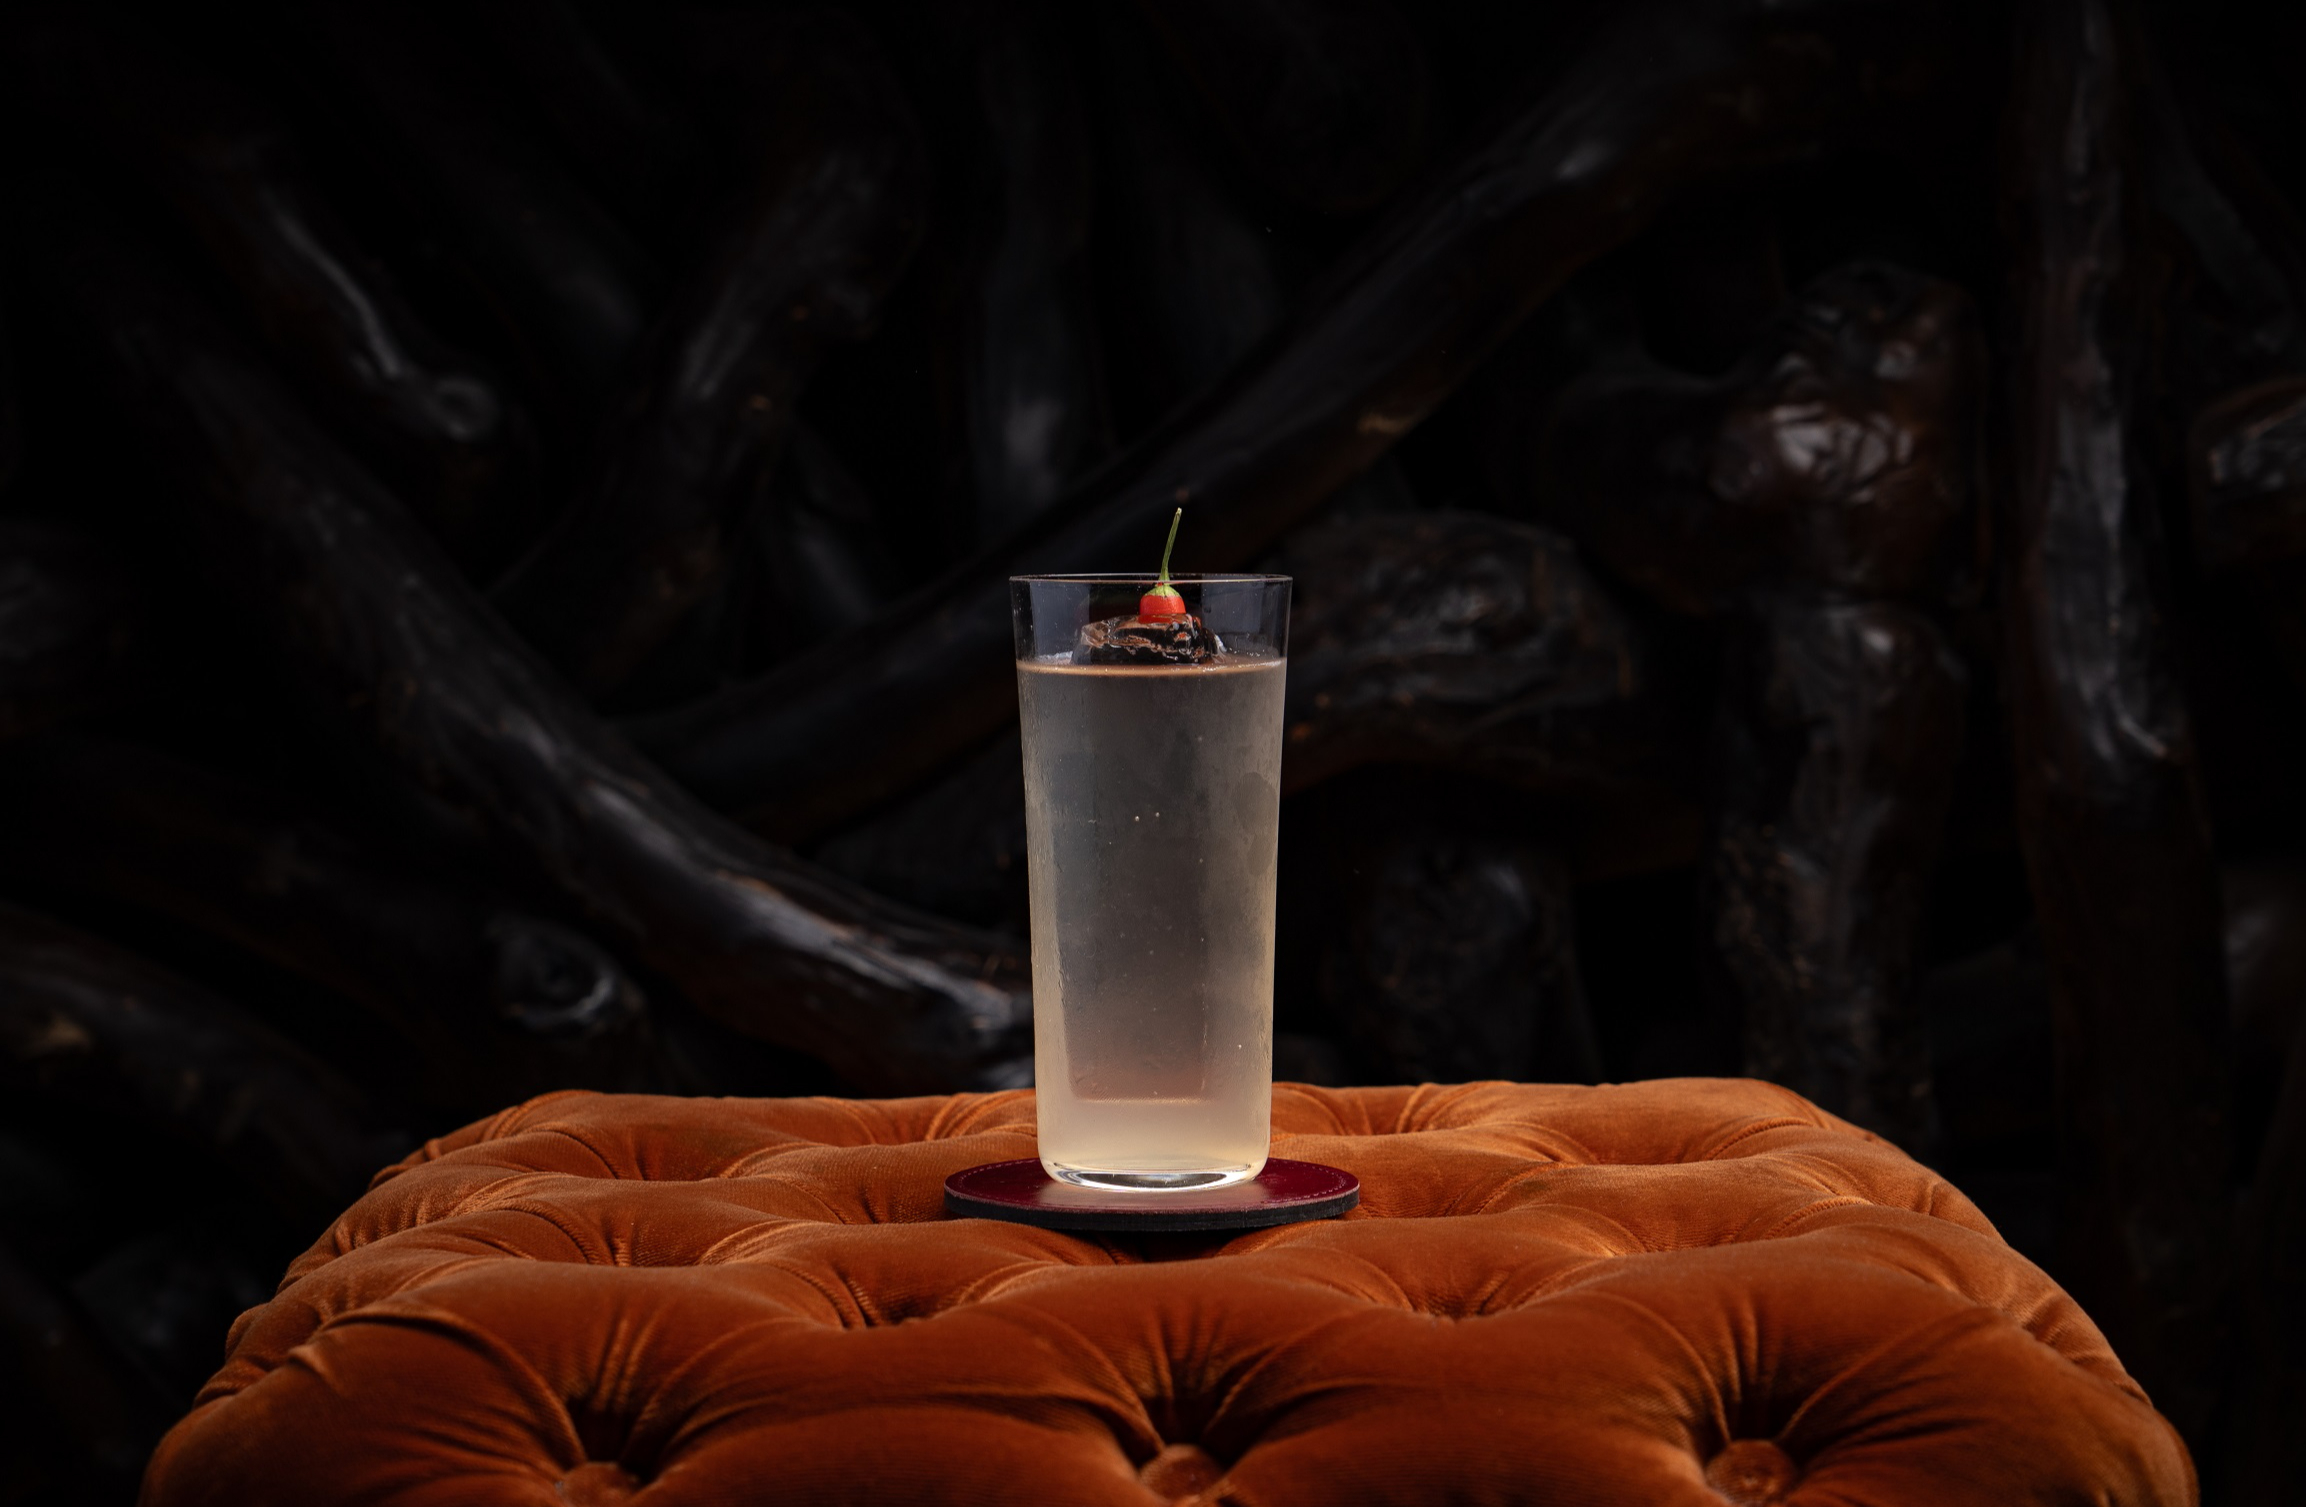 "Tales from a Speakeasy" - New Cocktail Menu - Available from April 17th at Sibin Speakeasy